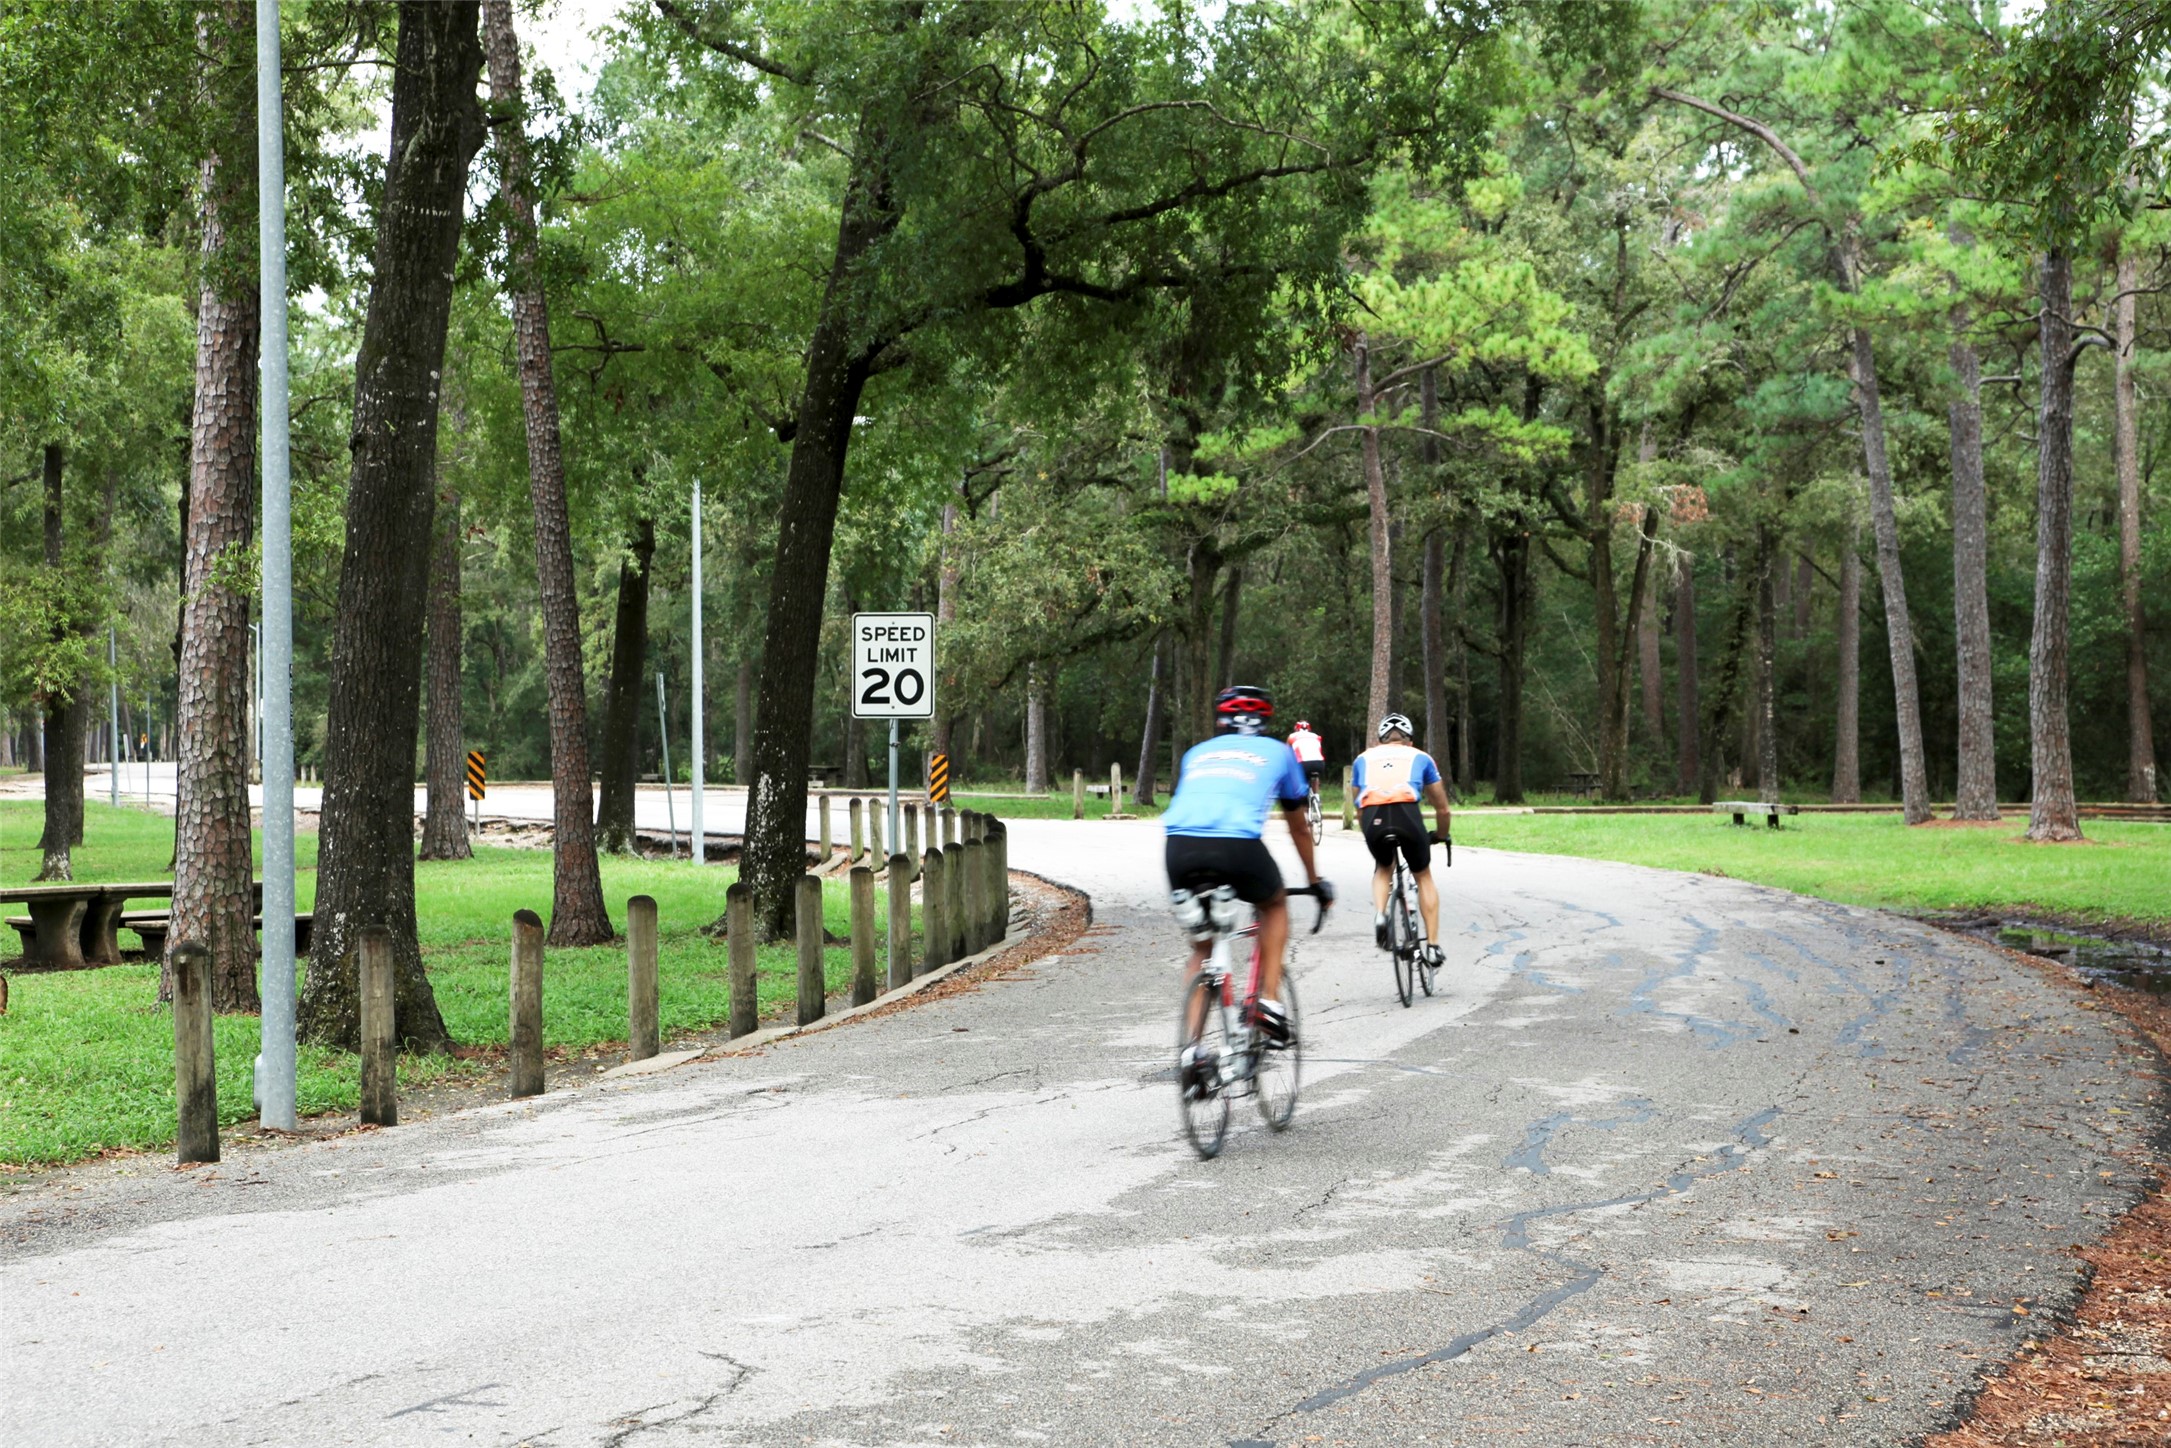 Steps away is the Bike Trail and neighborhood Bike Shop.  Memorial Park offers a variation of bike trails that range from easy to hard and a popular three-mile running course.